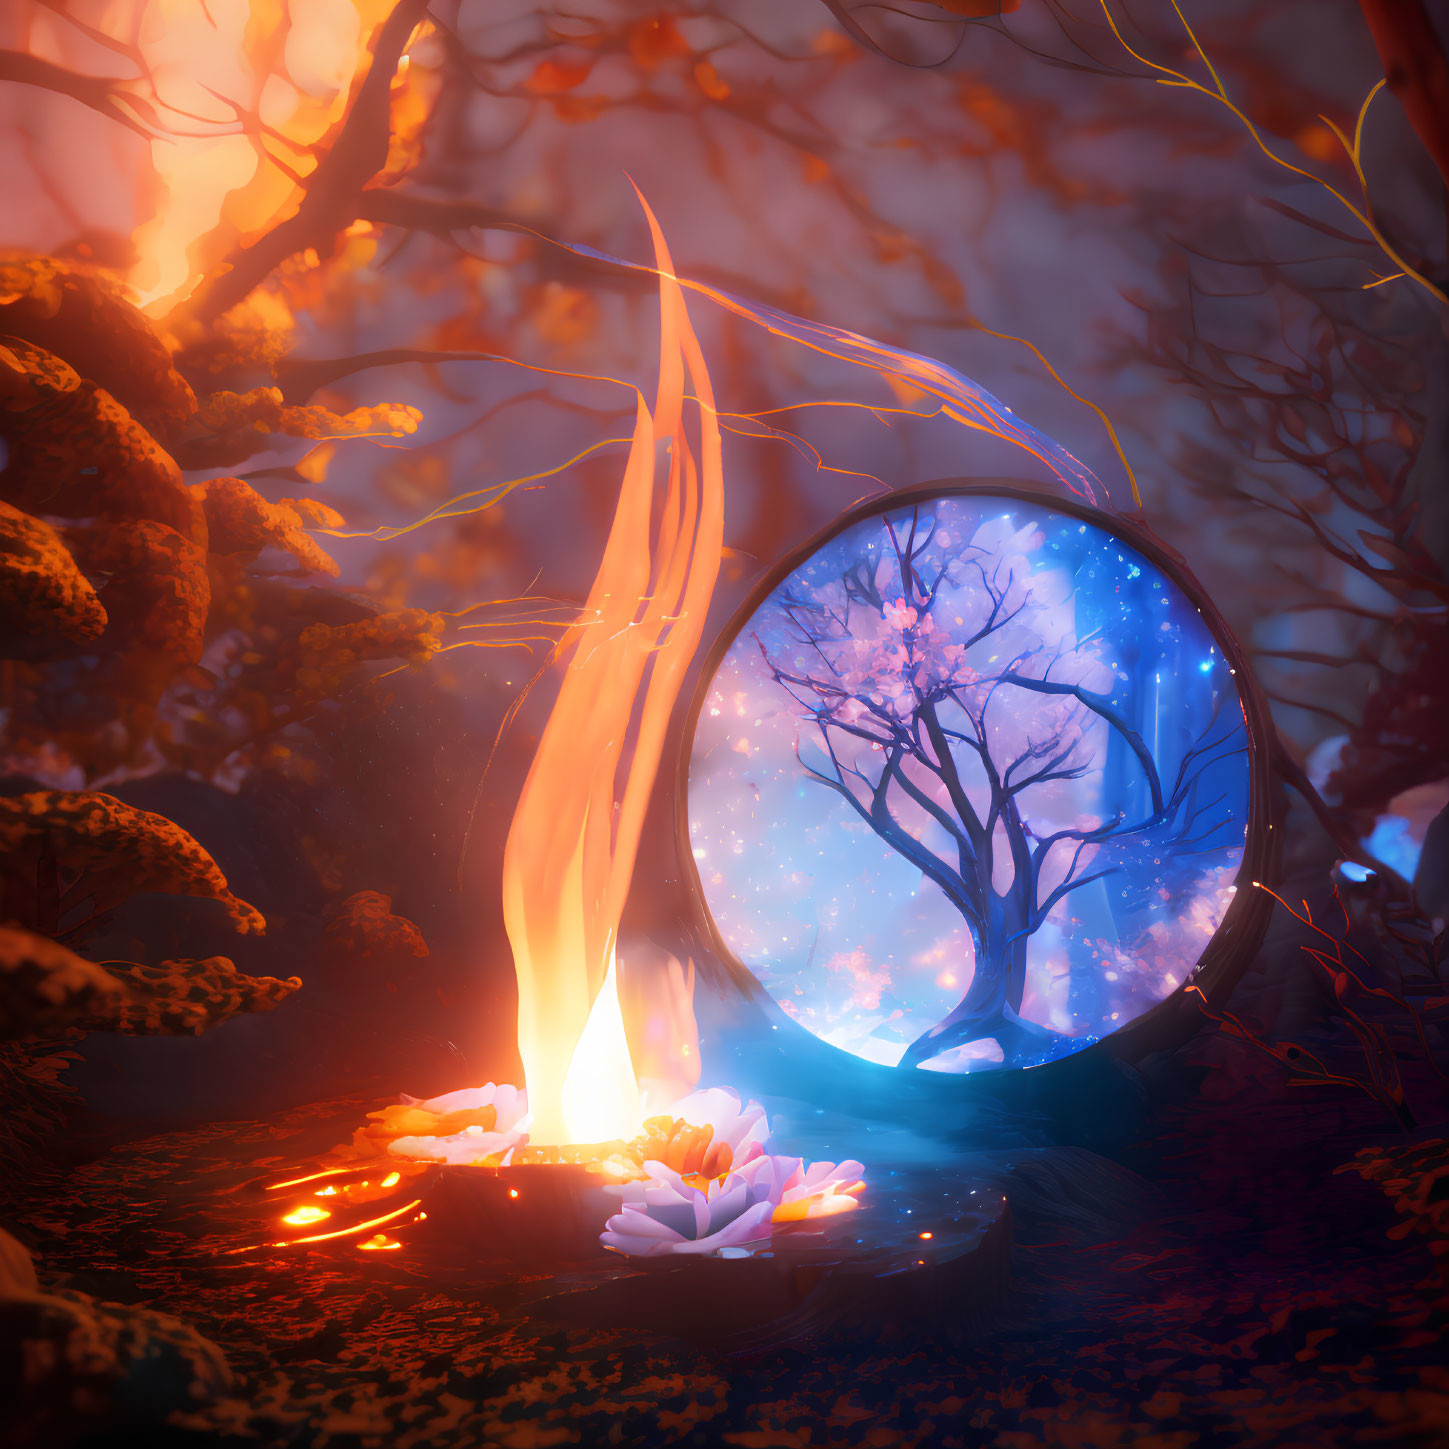 Vibrant campfire next to magical portal and cherry blossom tree